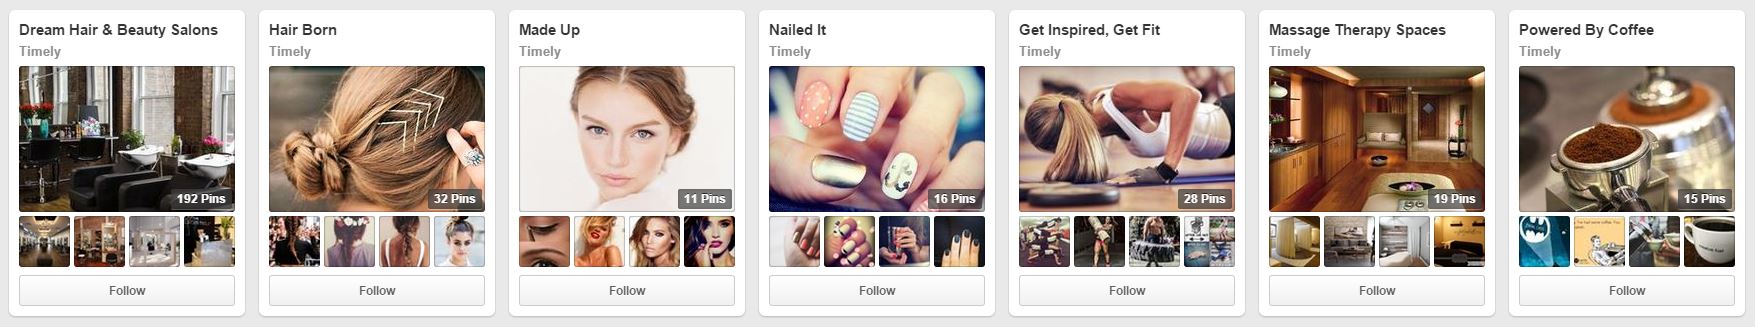 Timely's Pinterest Boards